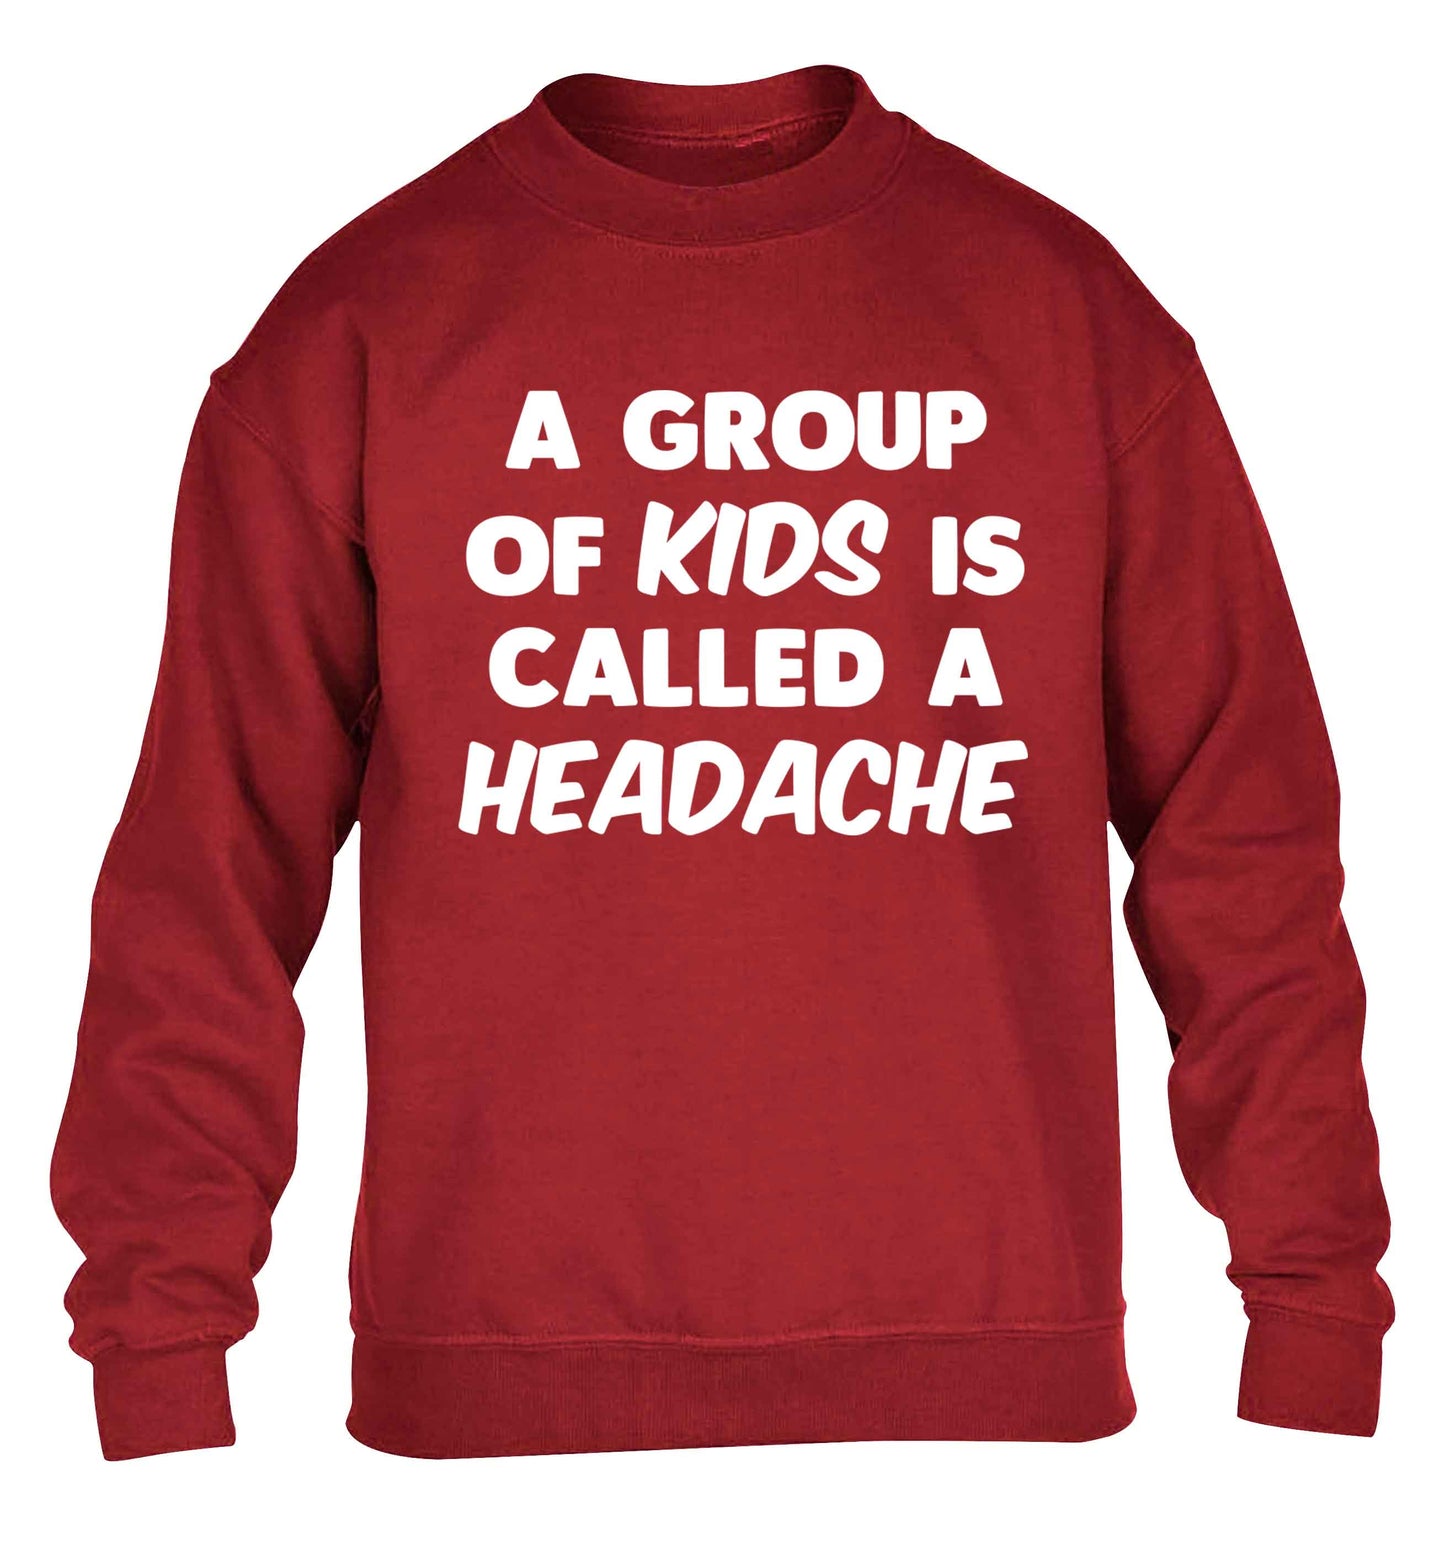 A group of kids is called a headache children's grey sweater 12-13 Years